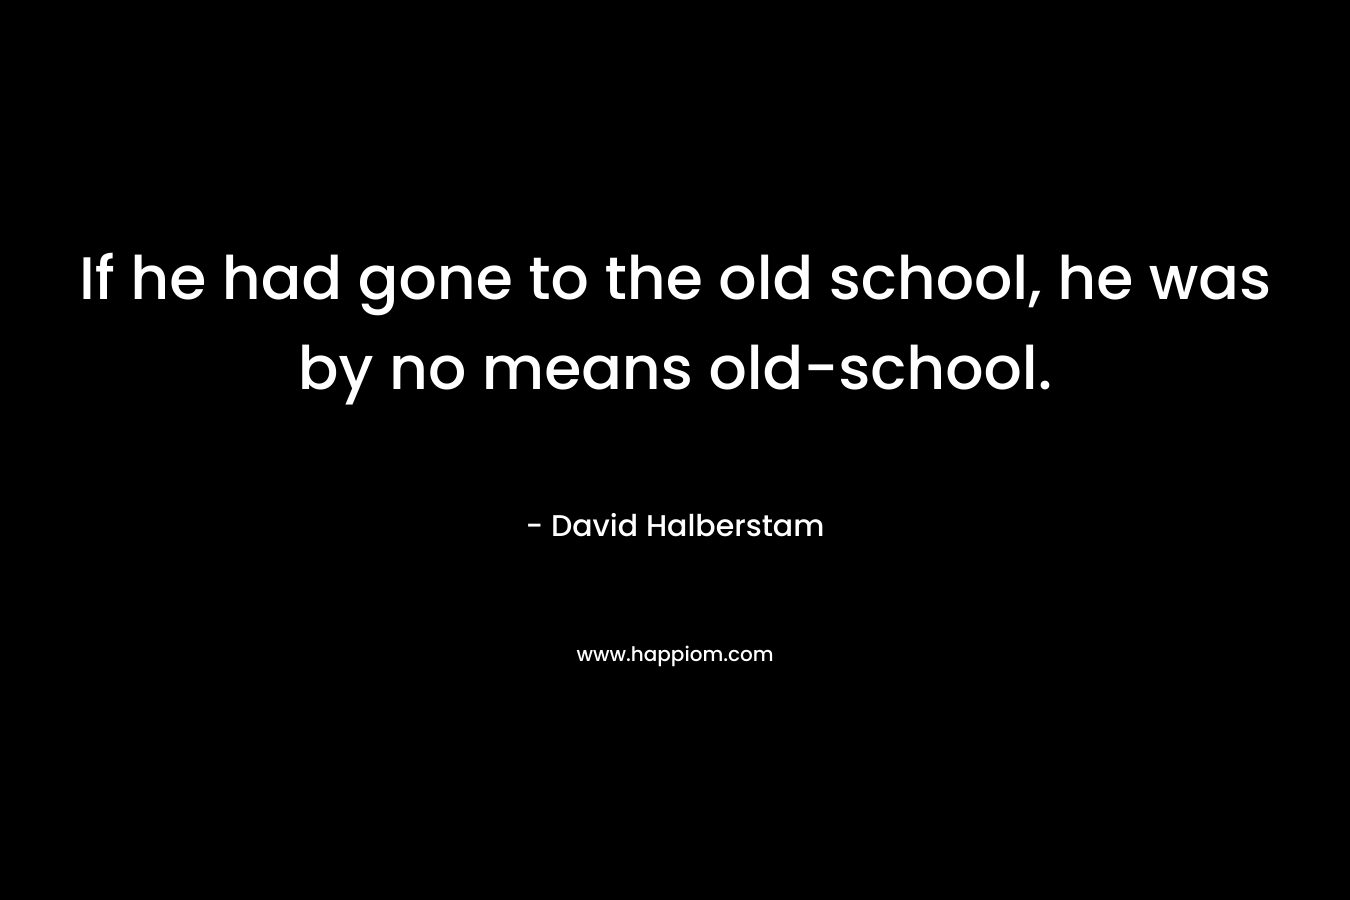 If he had gone to the old school, he was by no means old-school. – David Halberstam